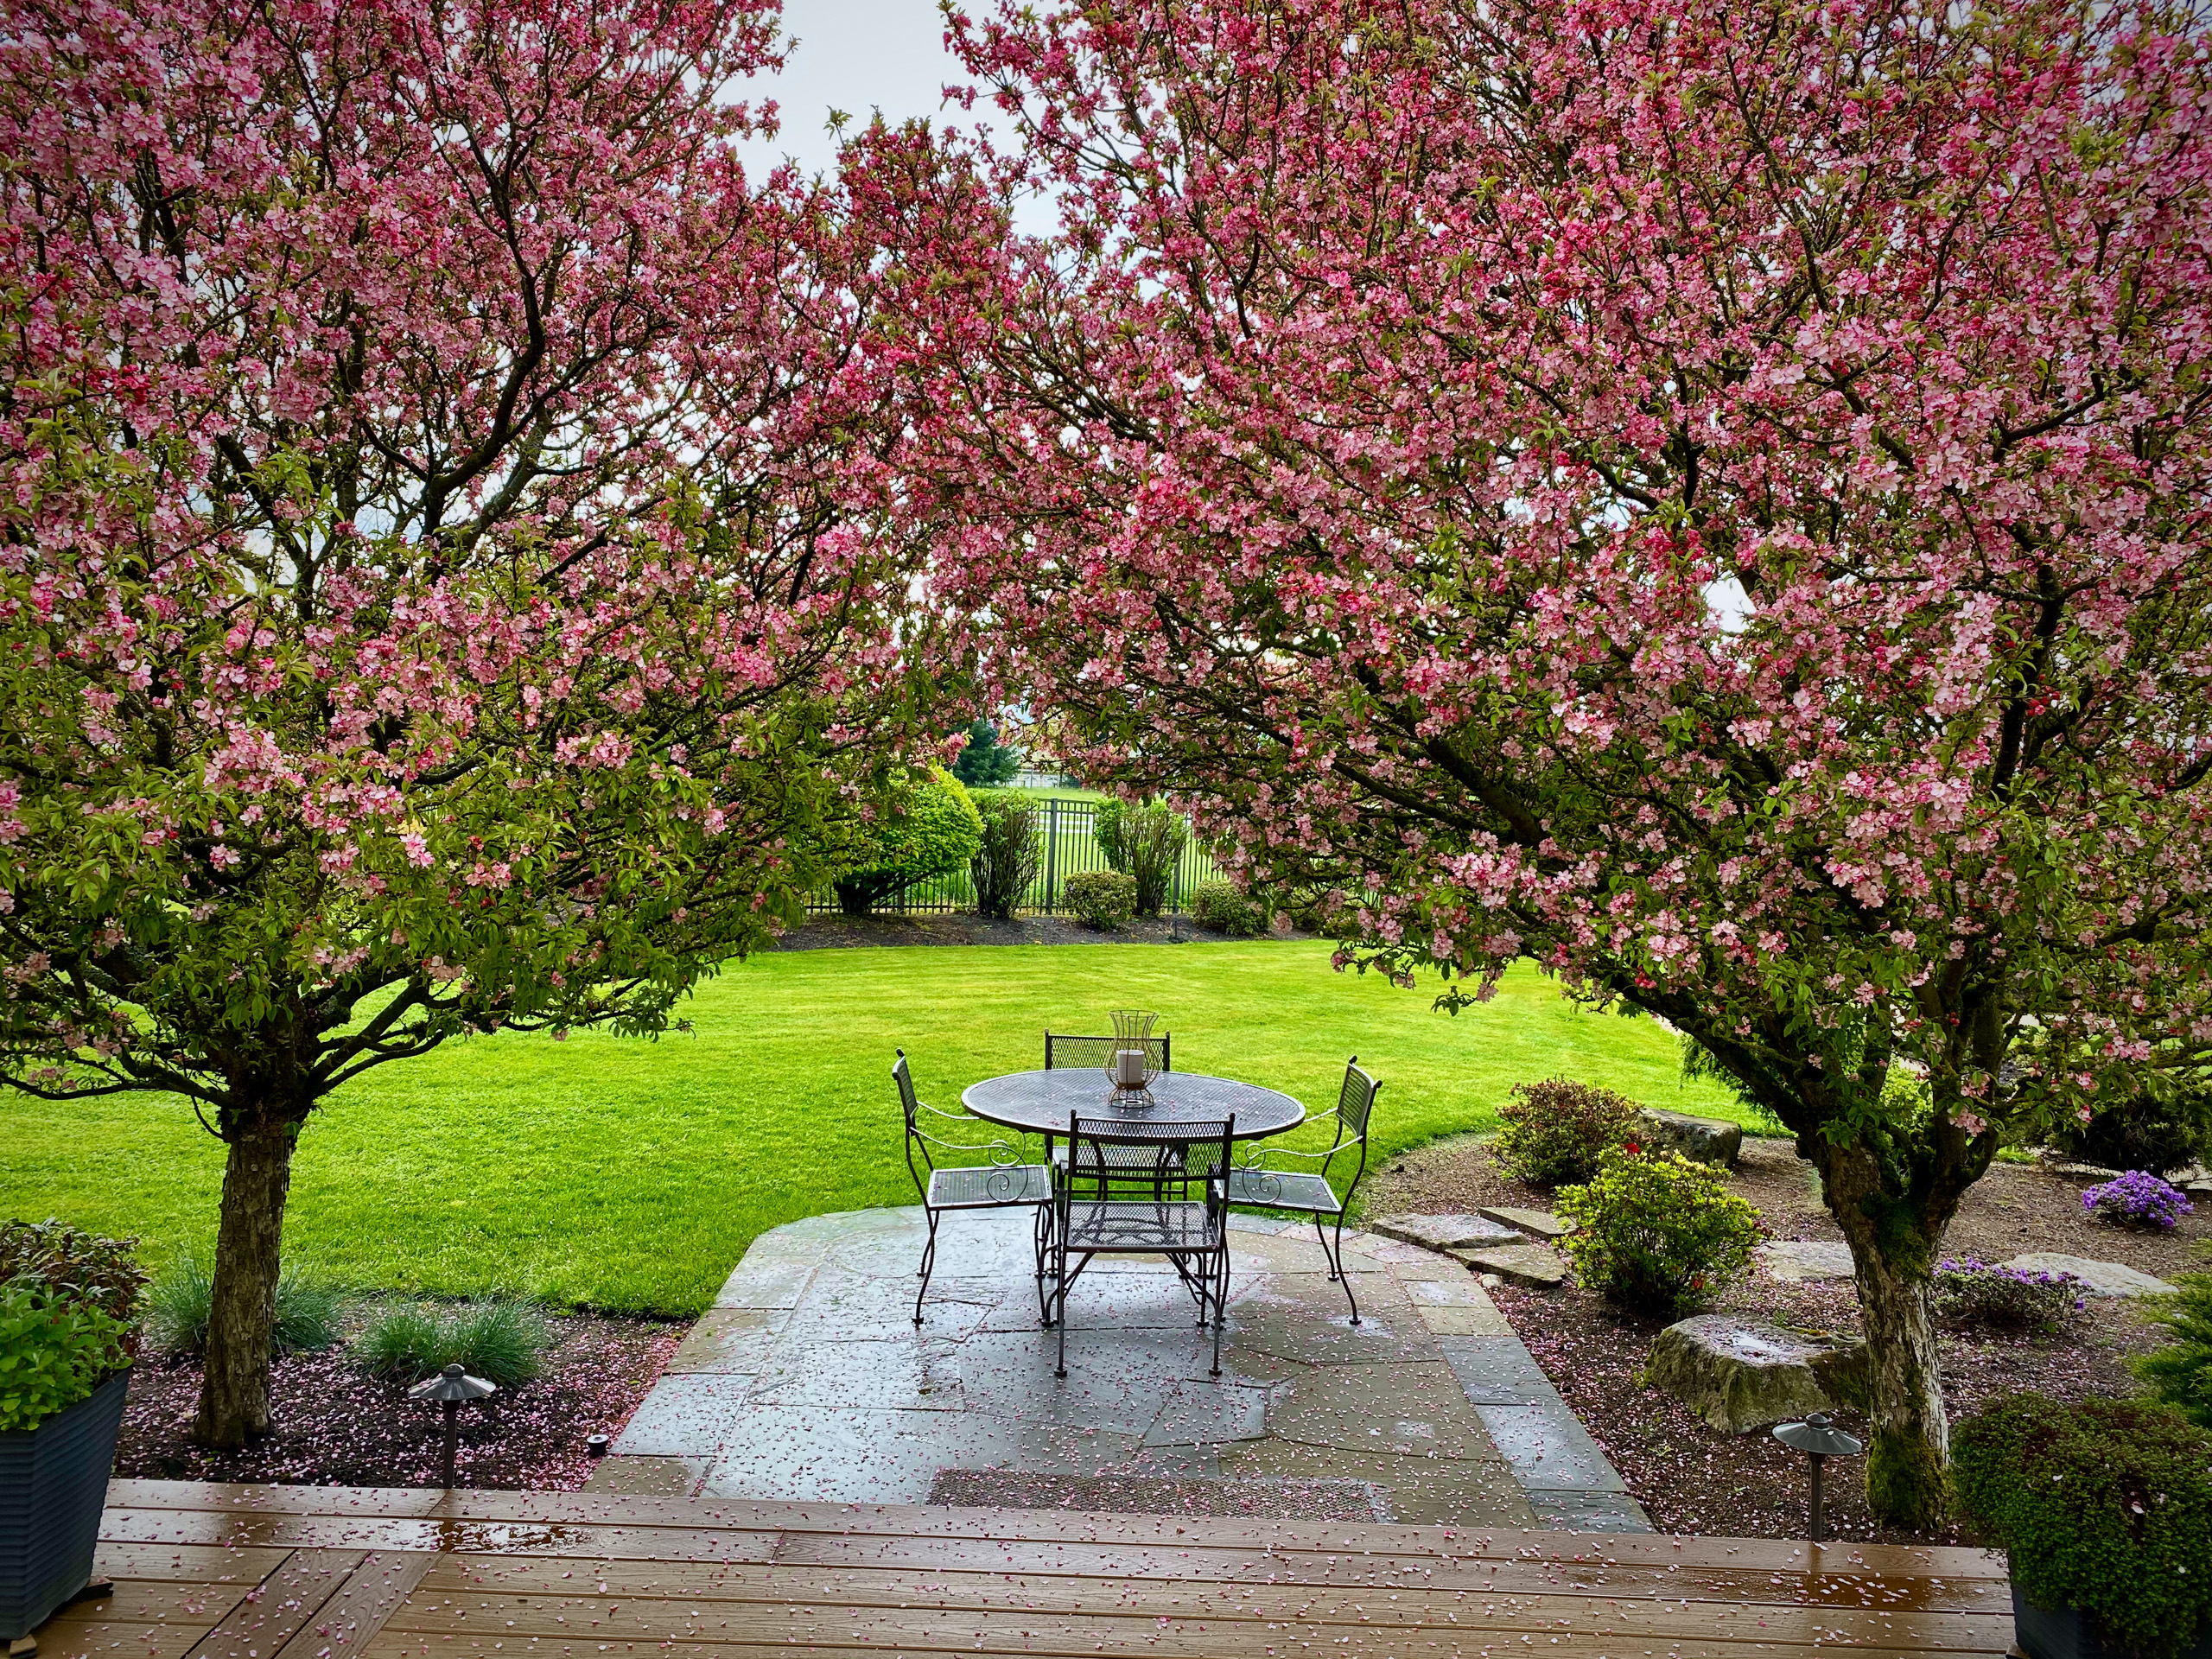 Photo of a Table with a View under Cherry Blossom Trees, Tour our Gardens